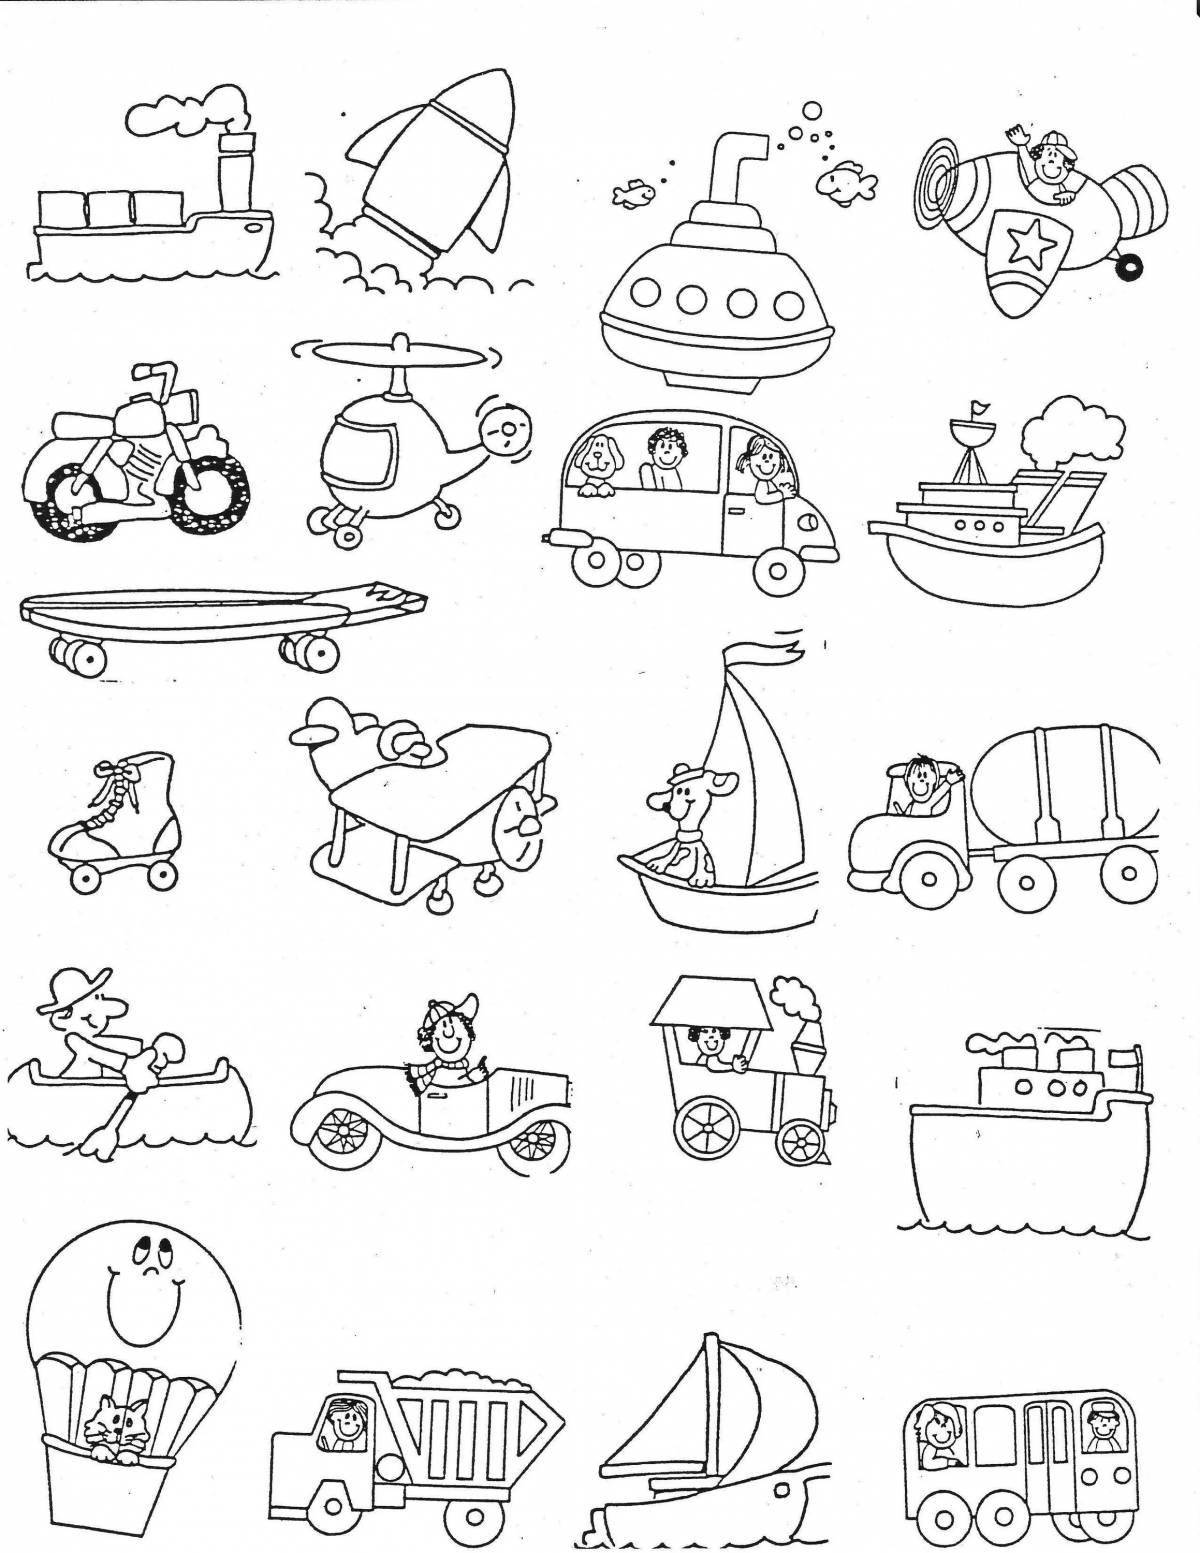 Outstanding transport coloring book for kids